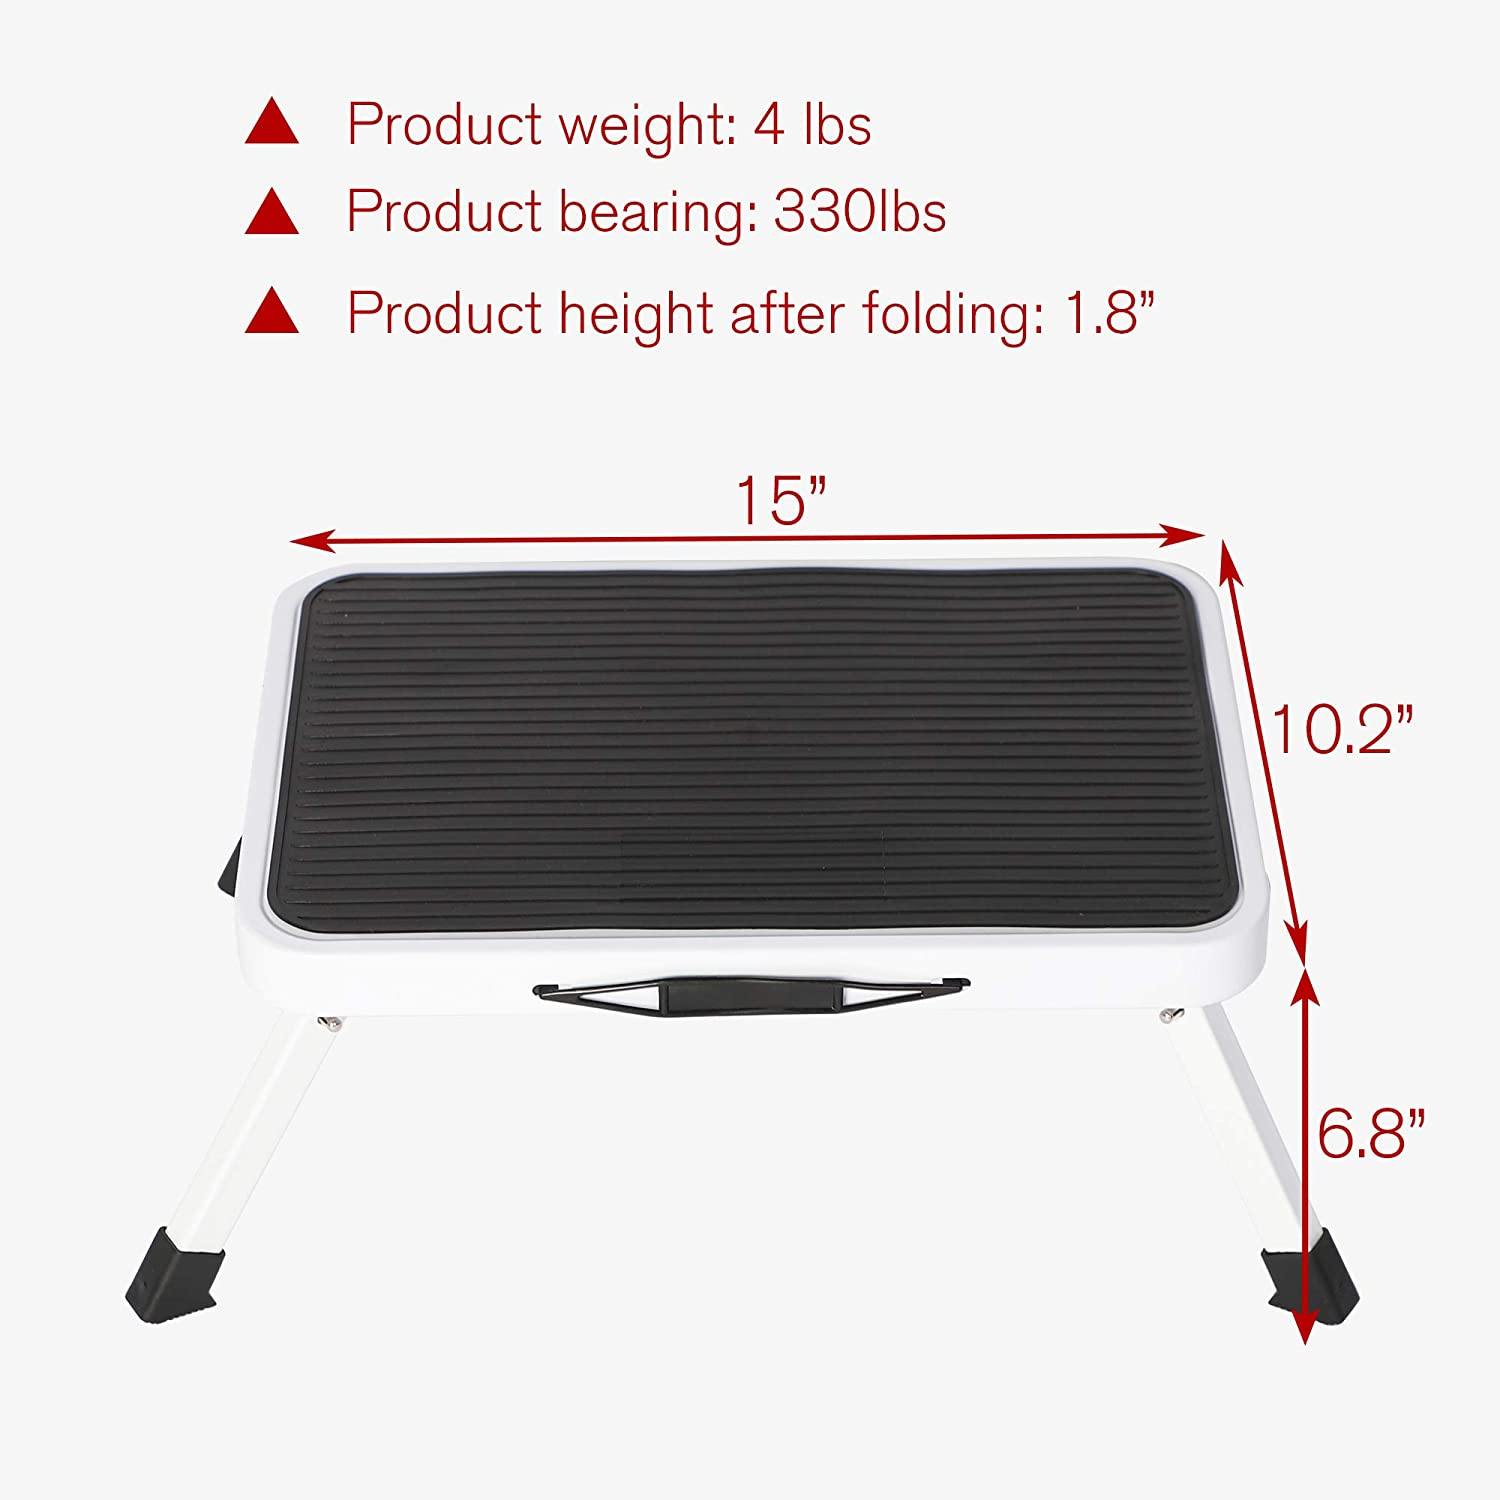 Portable Step Stool Lightweight One Step Ladder Folding Medical Footstool with Non Skid Rubber Platform, 330 lbs Capacity - Bosonshop